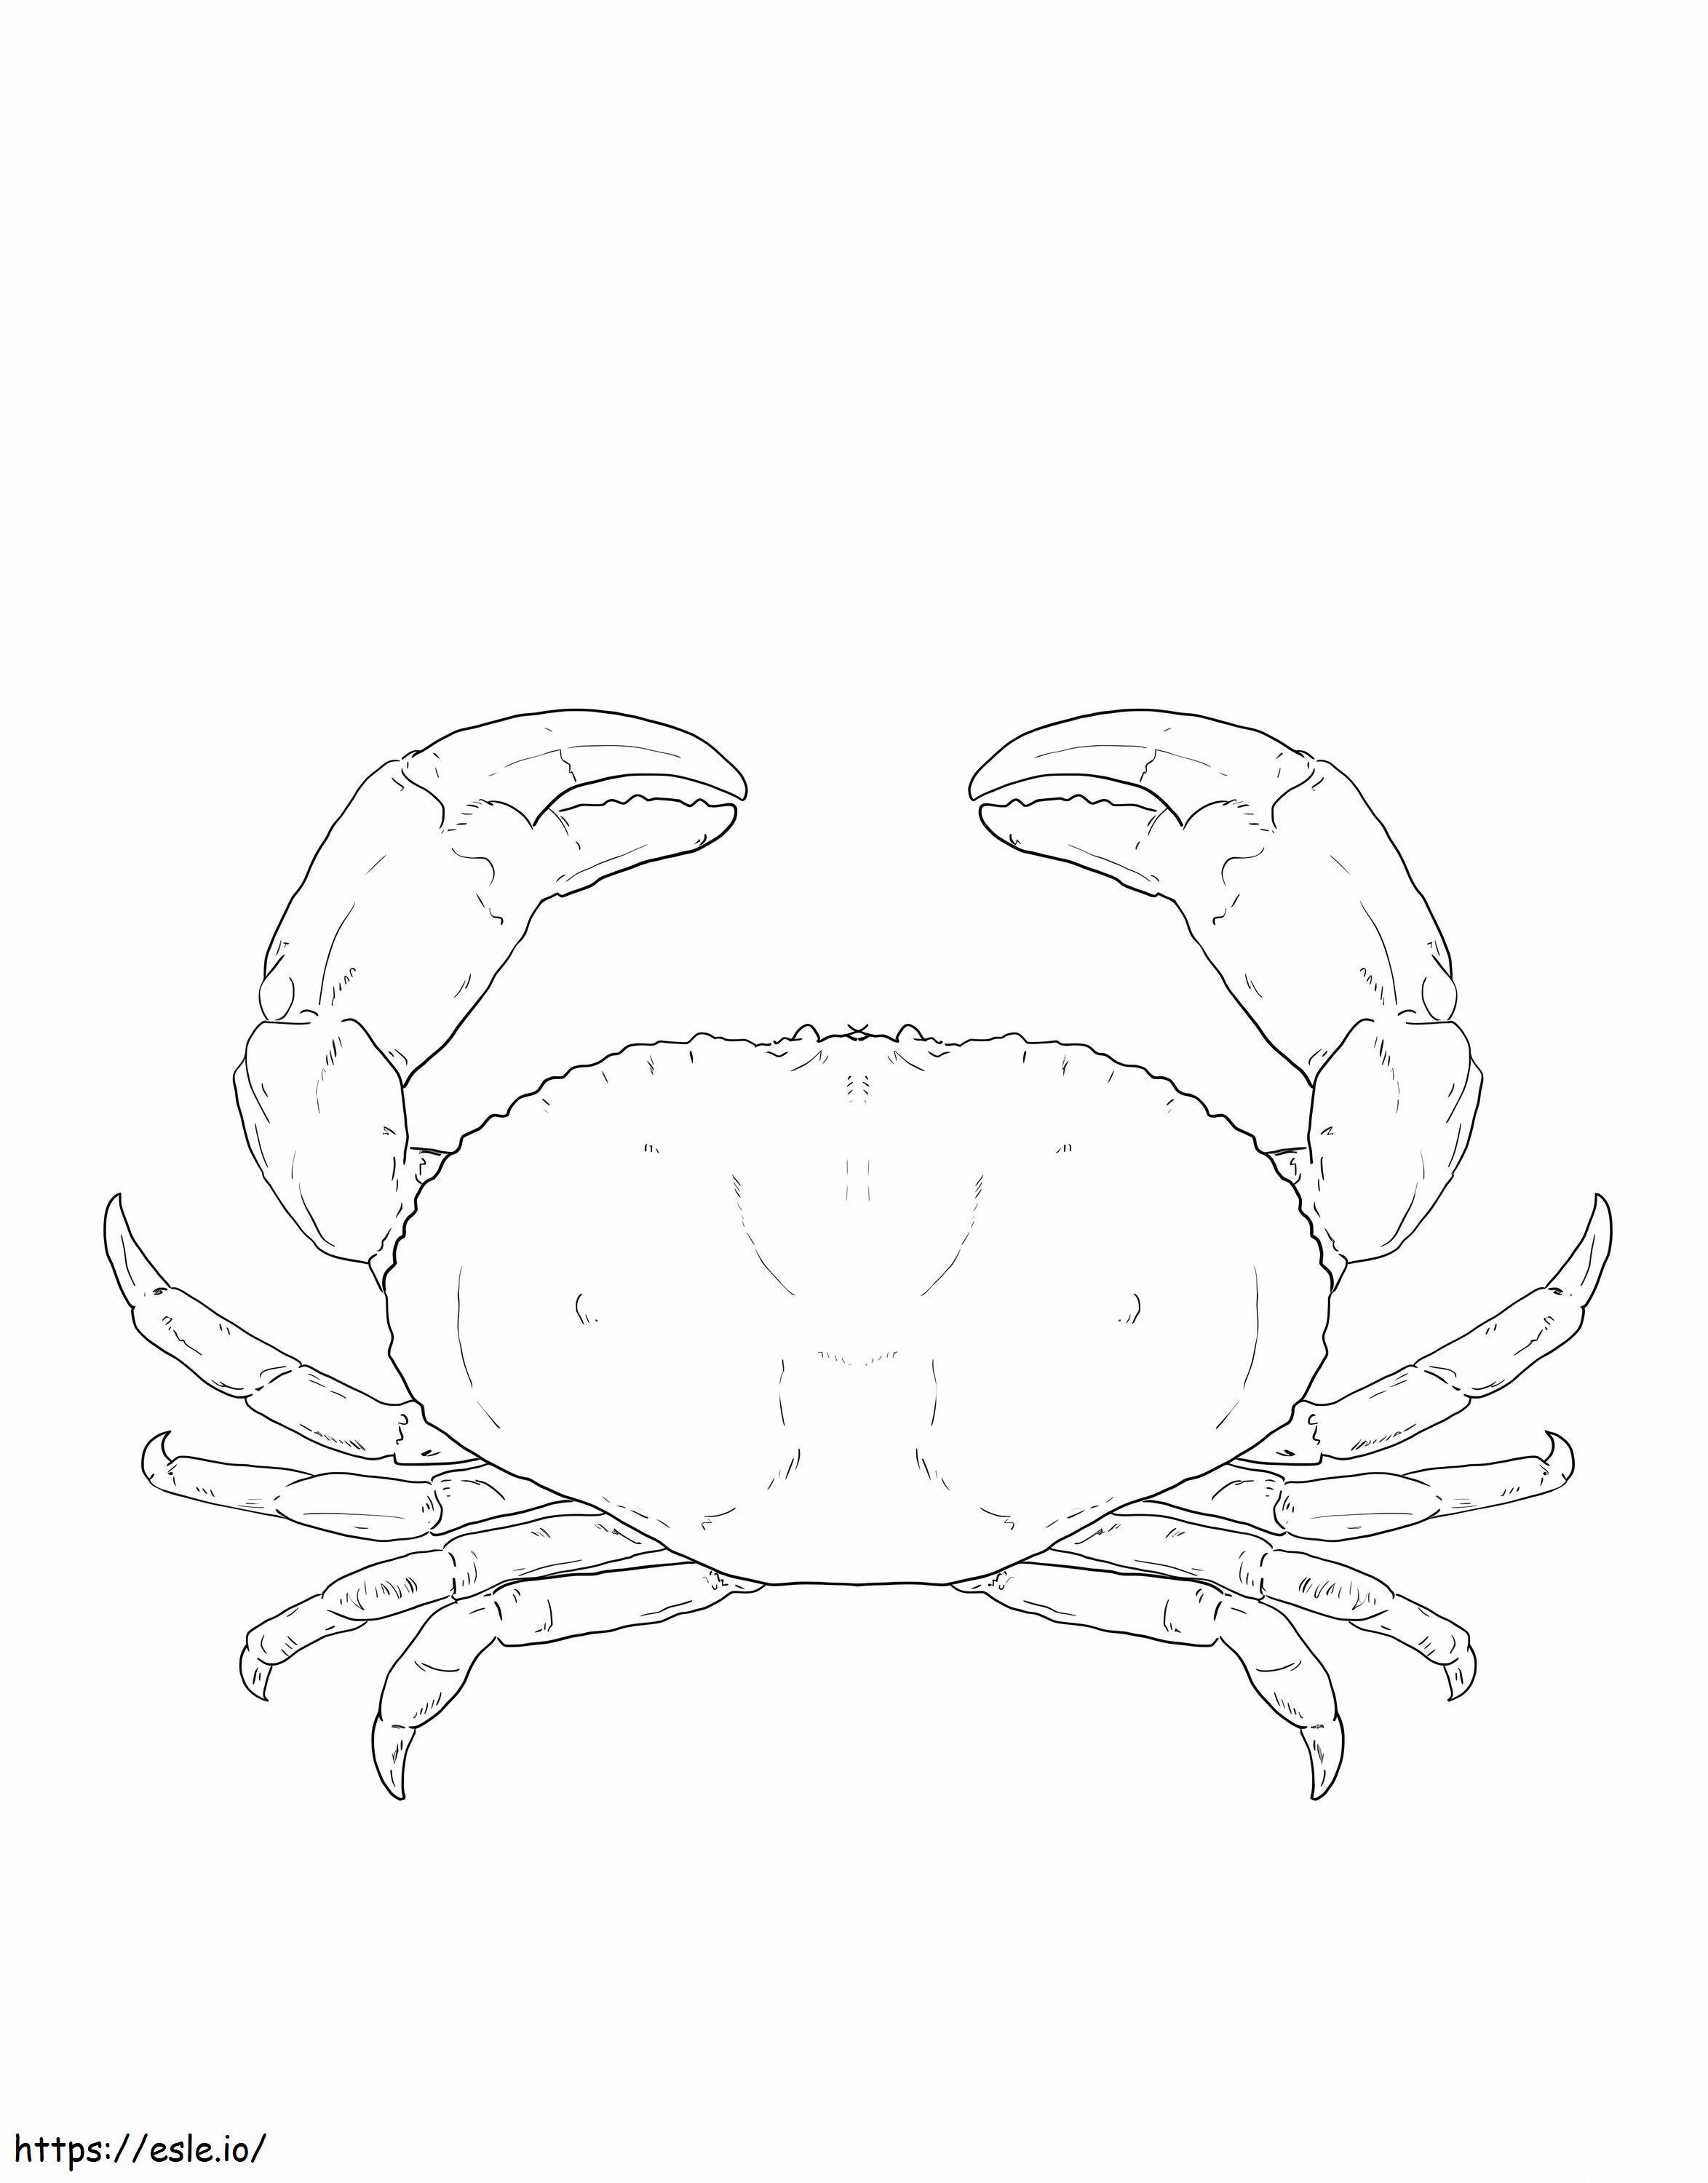 Red Rock Crab coloring page